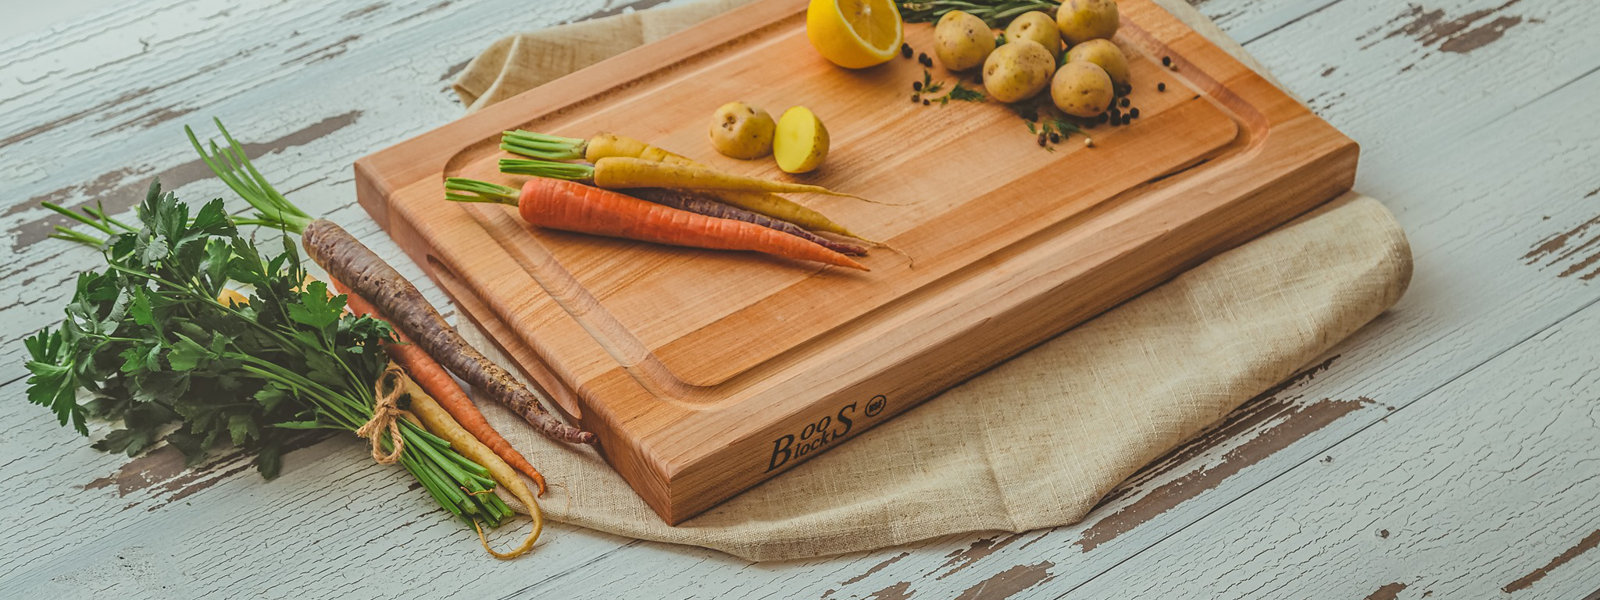 John Boos Medium Maple Wood Reversible Butcher Block Cutting Board, 18 x 12  x 1.25 Inches Thick, Edge Grain, and Integrated Hand Grip, Brown